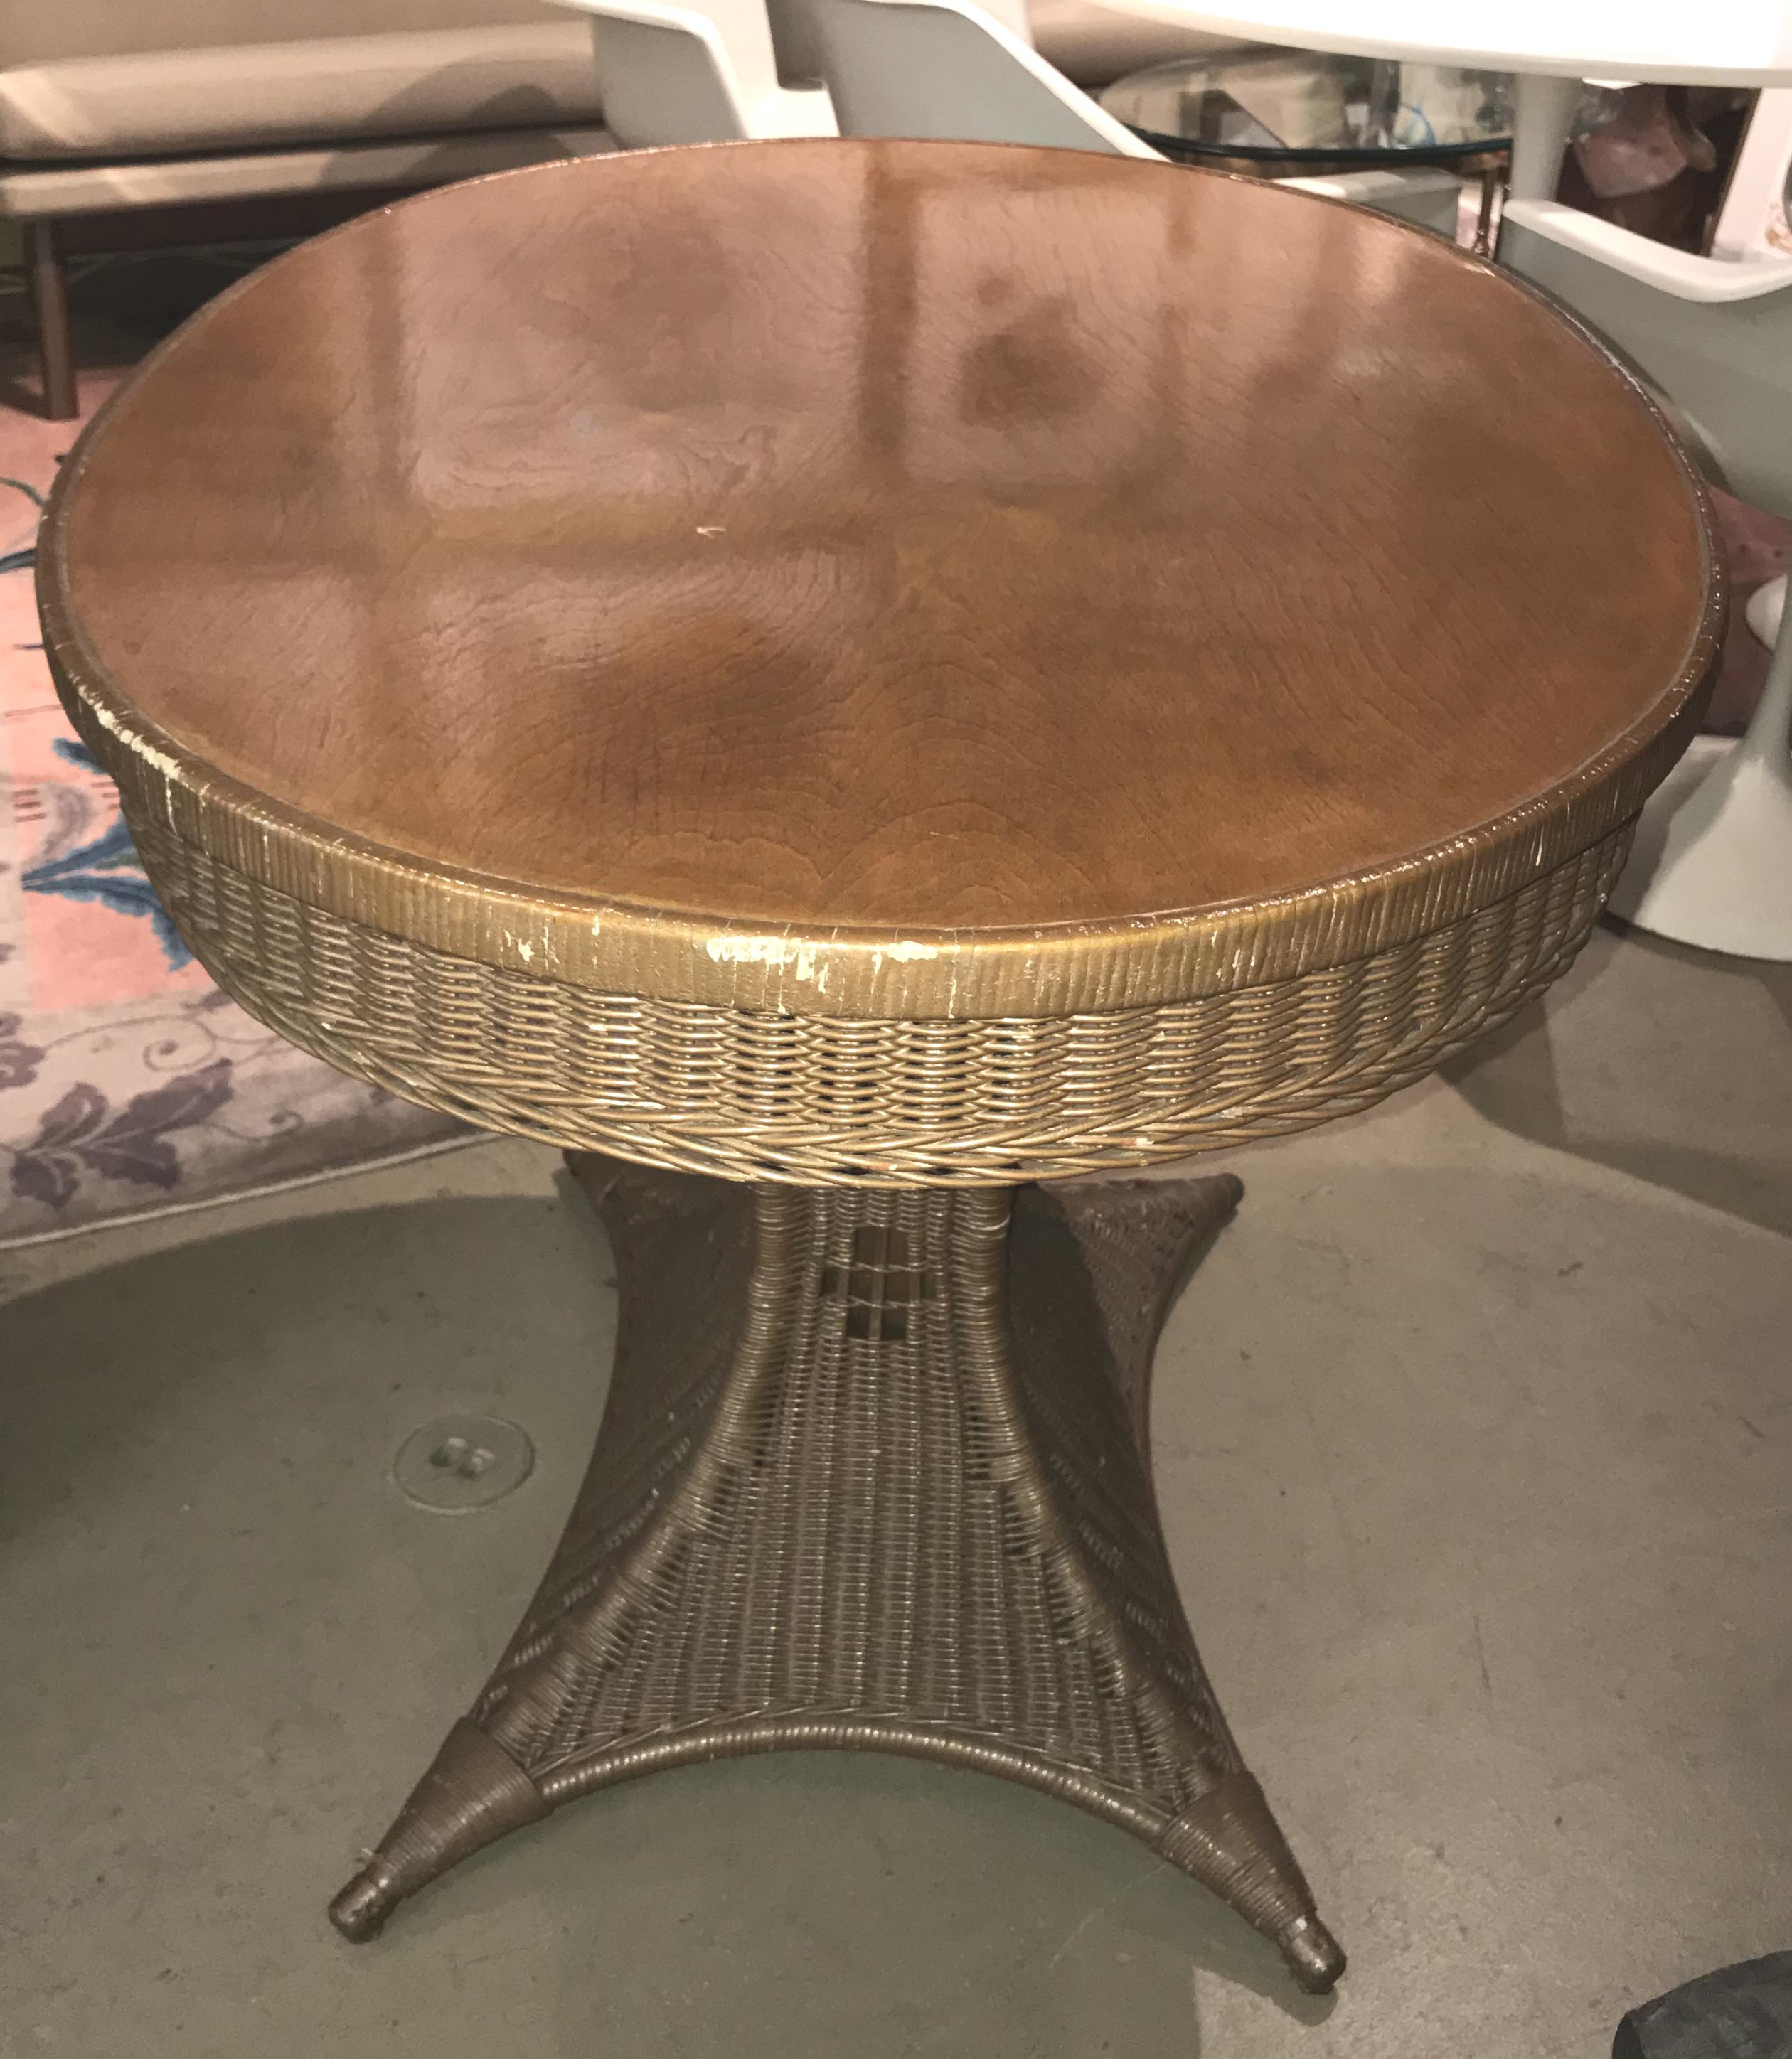 Painted Early 20th Century Paine Furniture Company Oval Wicker Pedestal Center Table